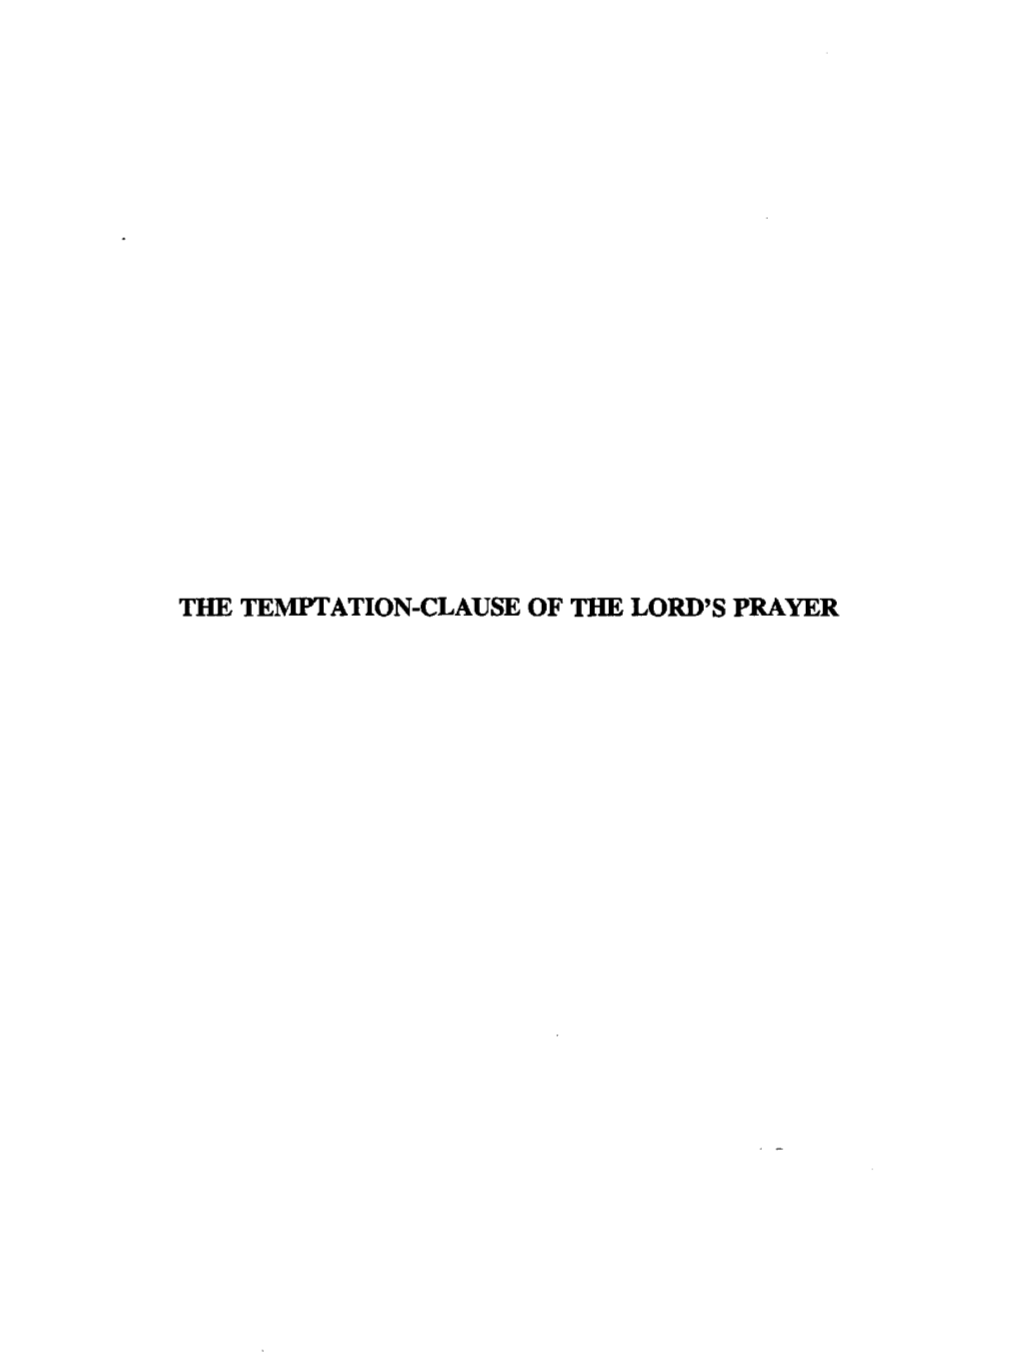 The Temptation-Clause of the Lord's Prayer the Temptation-Clause of the Lord's Prayer